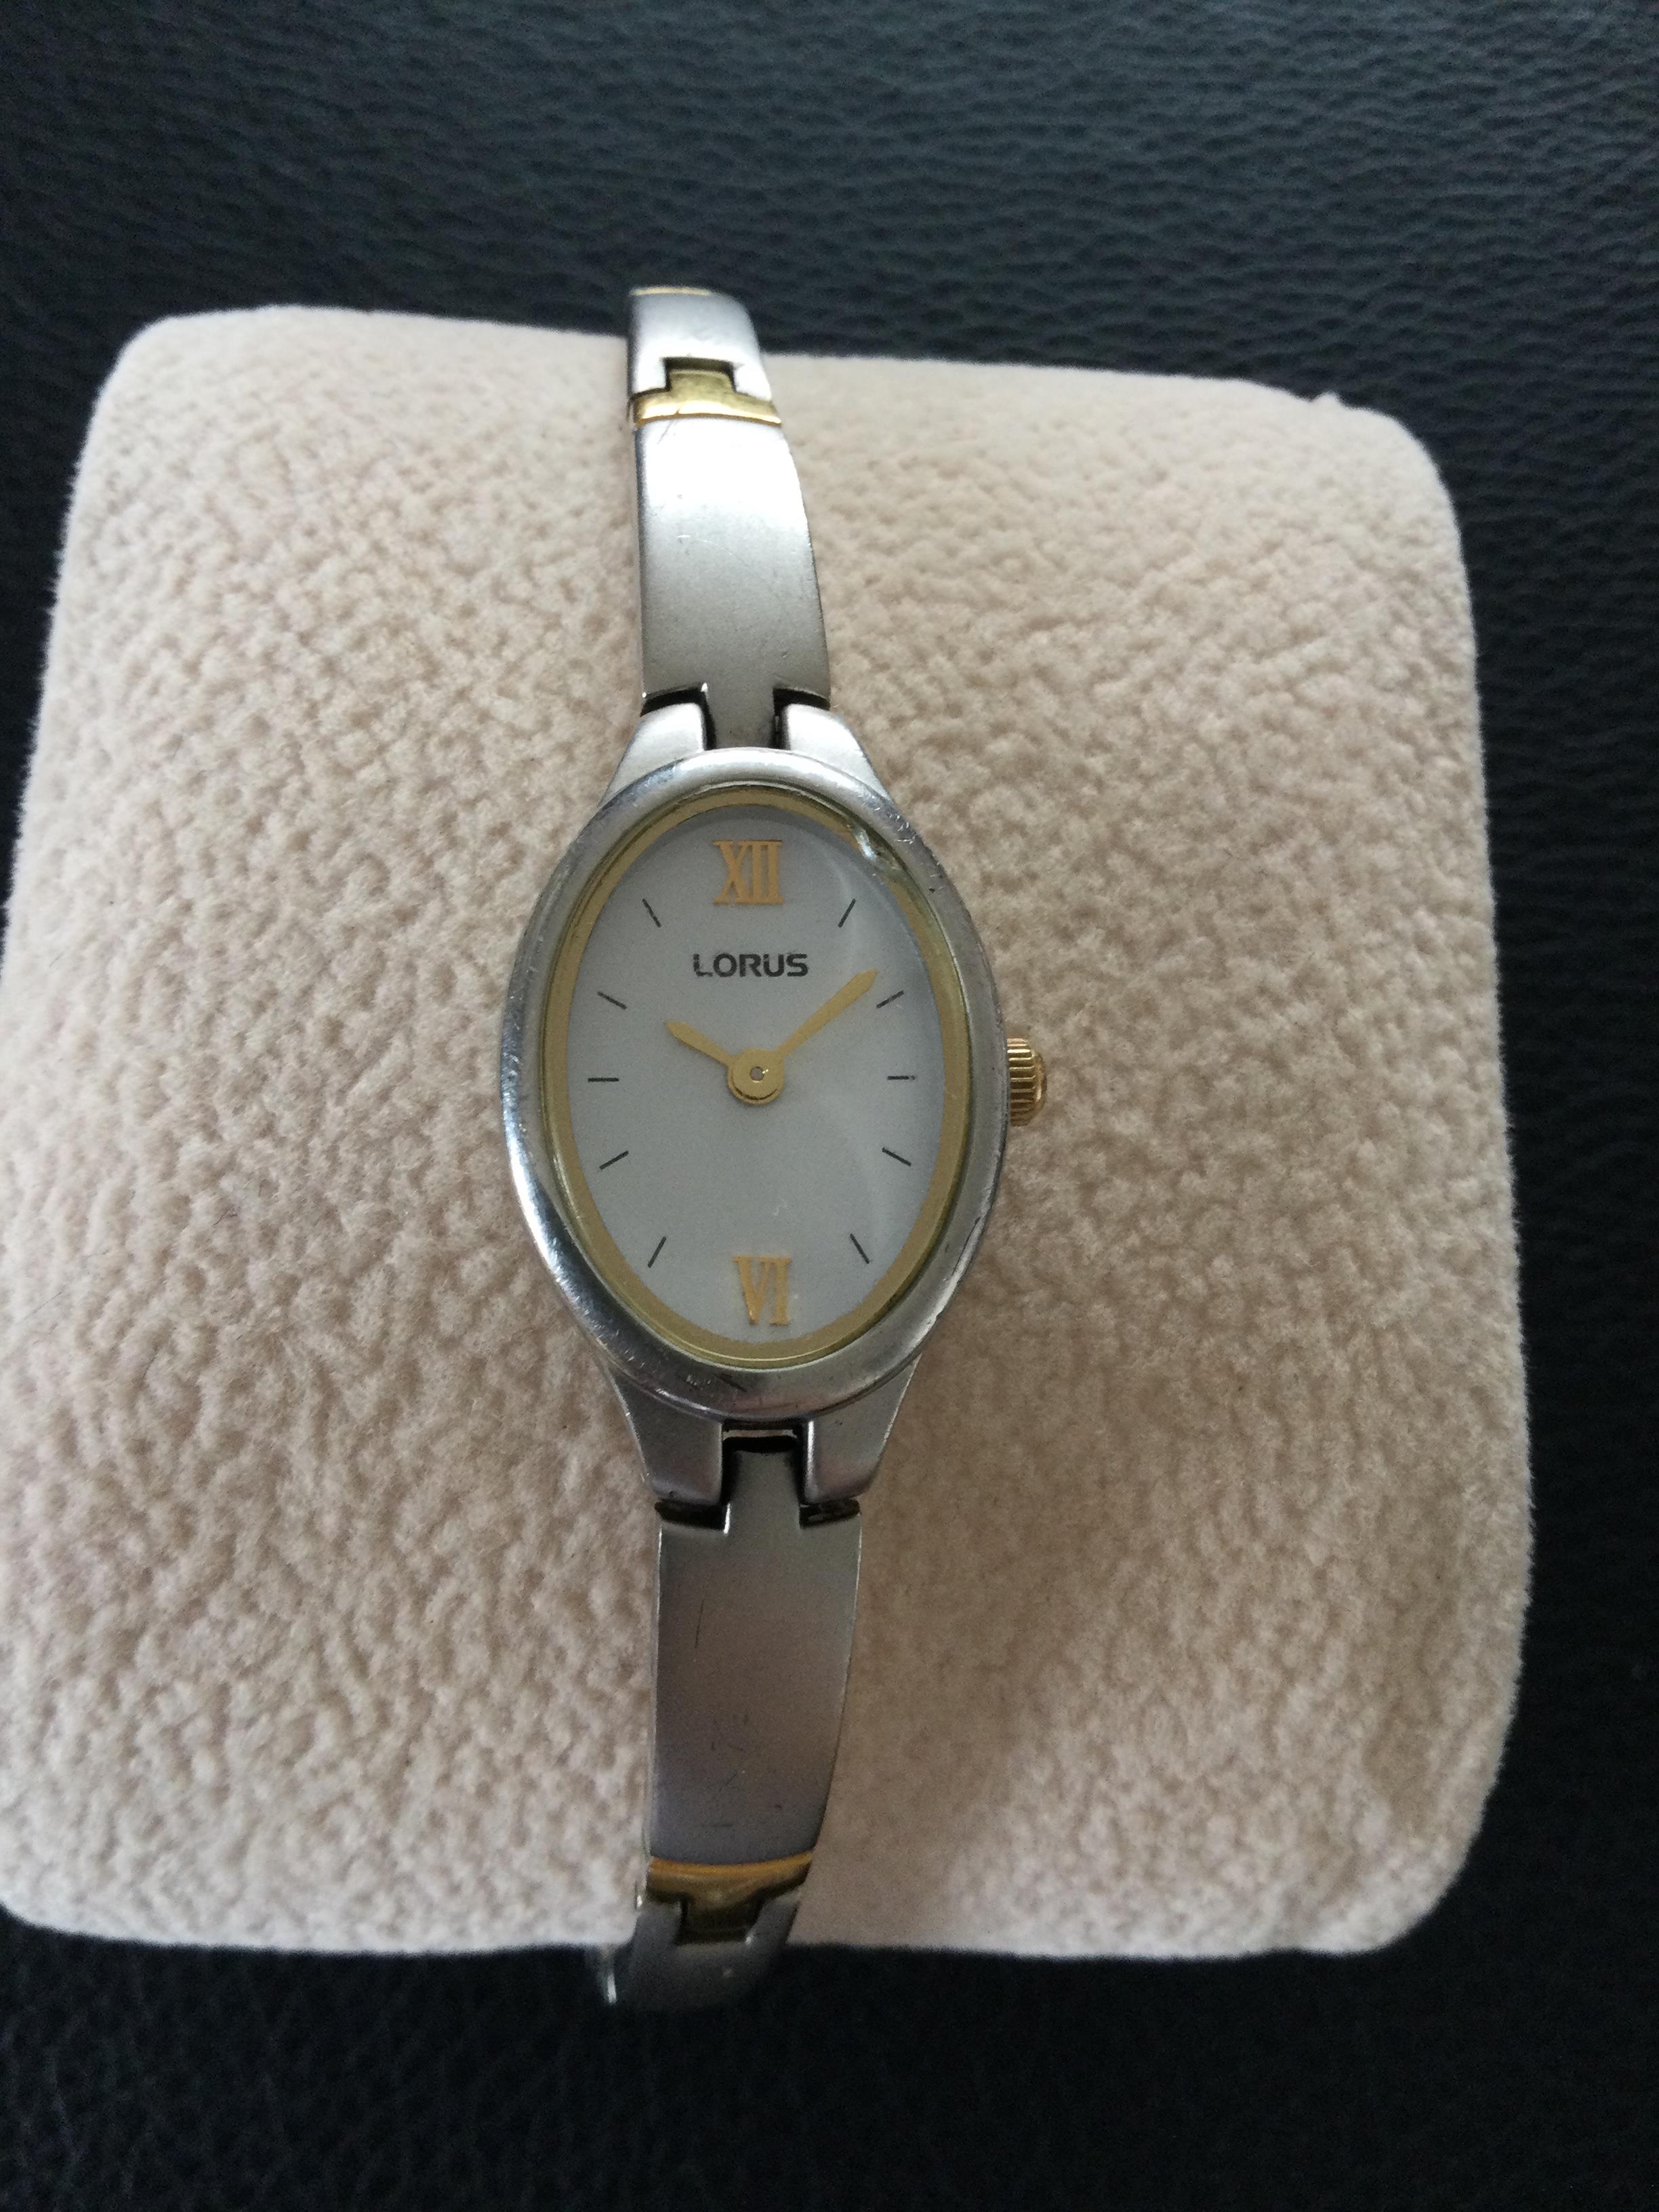 Elegant Lorus Ladies Quartz Wristwatch with Gold Plated Hands (GS 120) A lovely and elegant